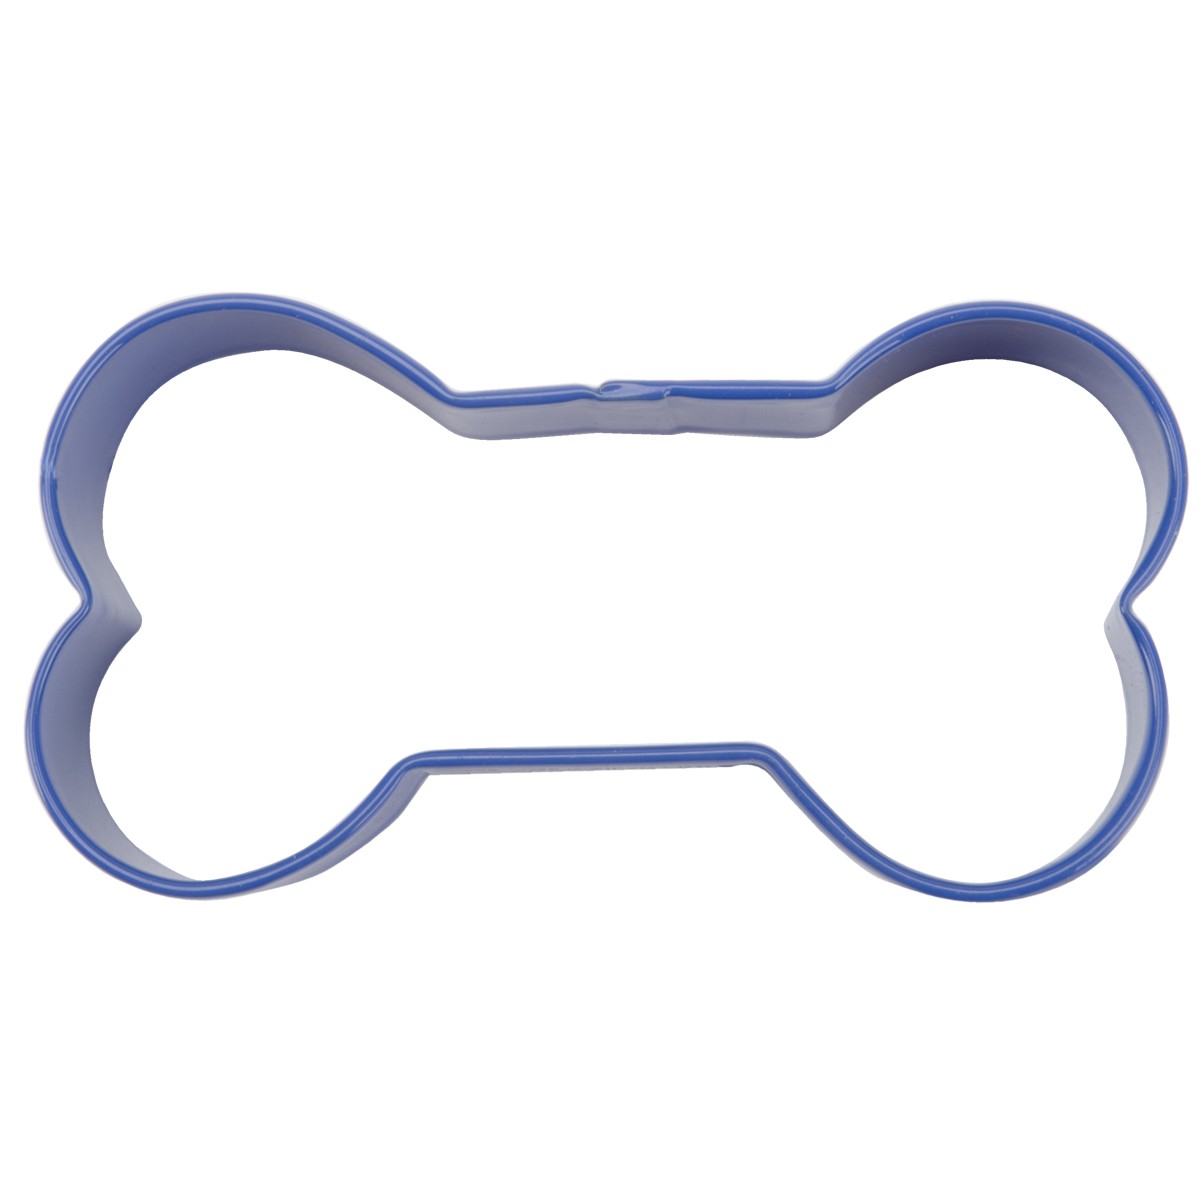 Free dog biscuit clipart 